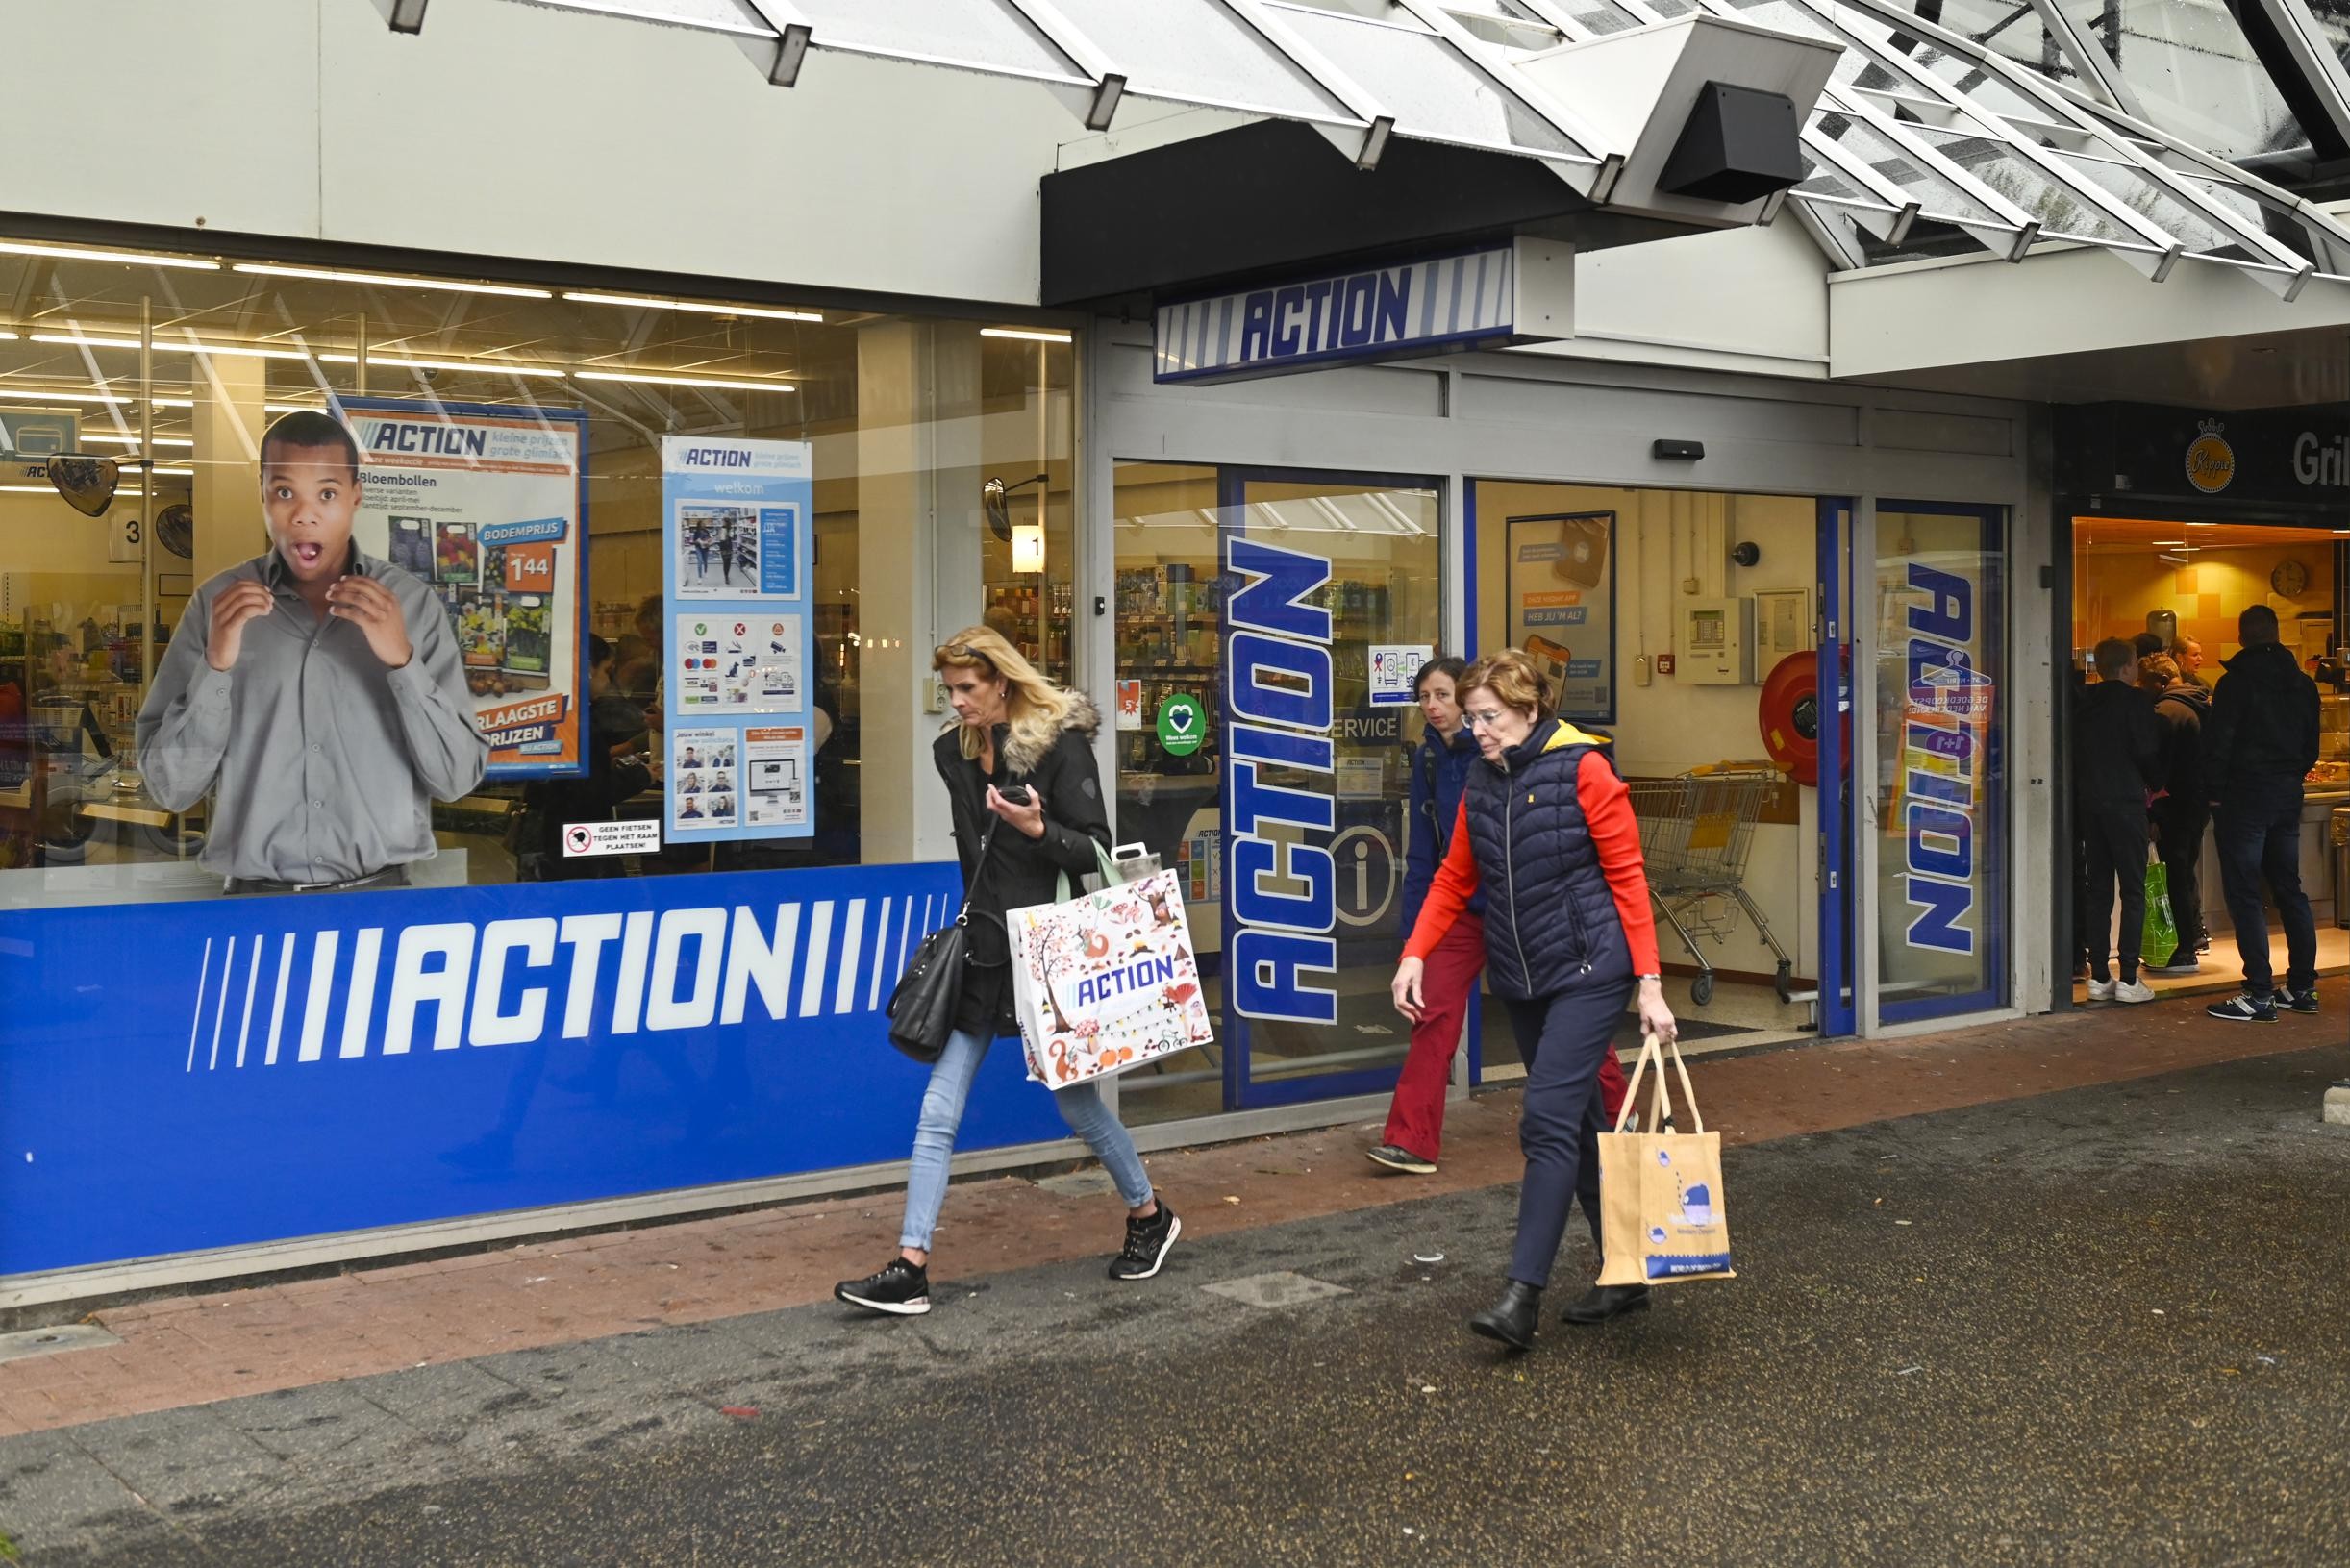 At Action, the opening of new stores has resulted in a large increase in turnover